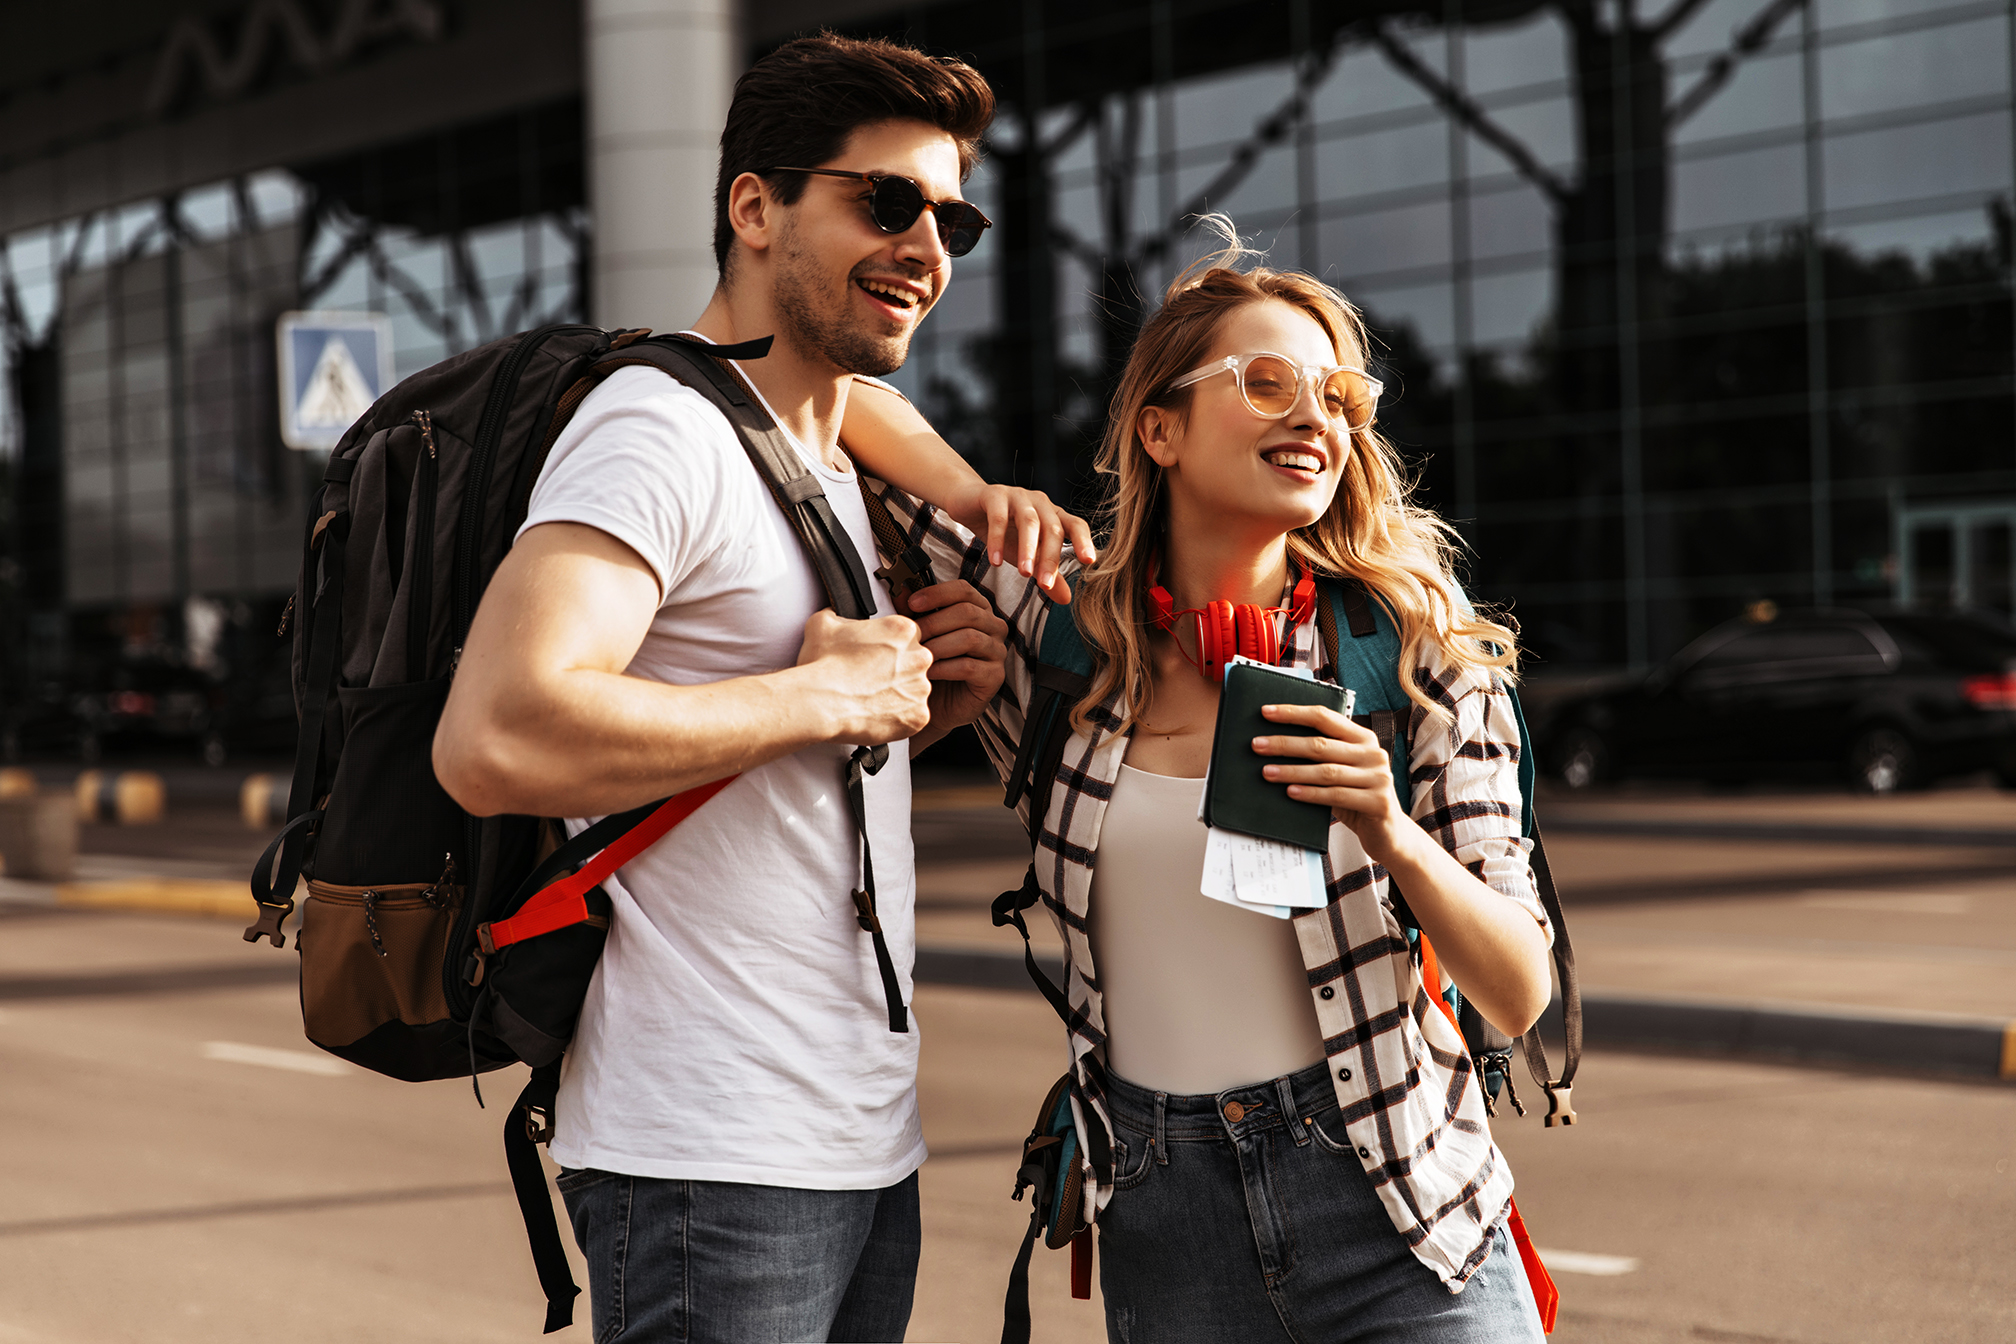 Travelers with backpacks poses near modern airport. Happy blonde woman in plaid shirt, sunglasses holds passport, brunette man in white tee smiles.